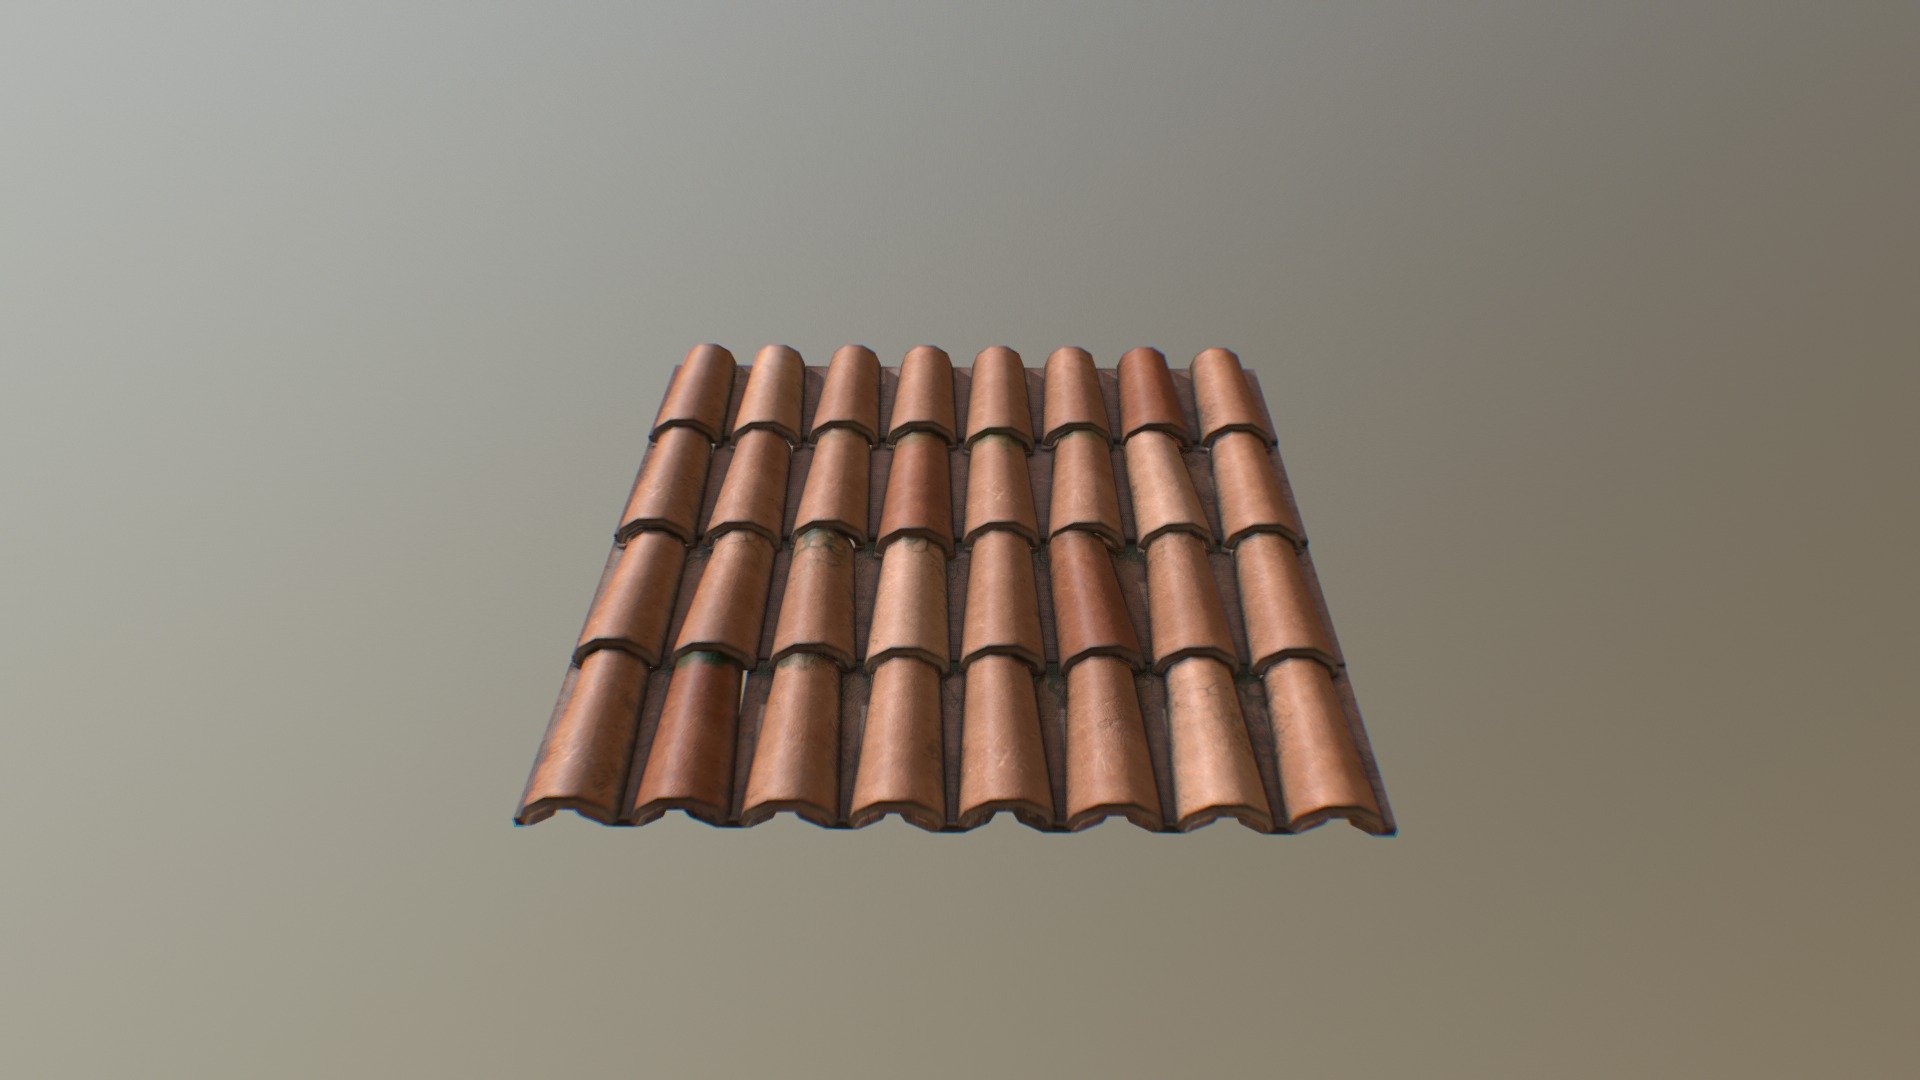 Roof Shingles
Both mesh and textures are tileable. 
You can use just textures on single polygon too 3d model